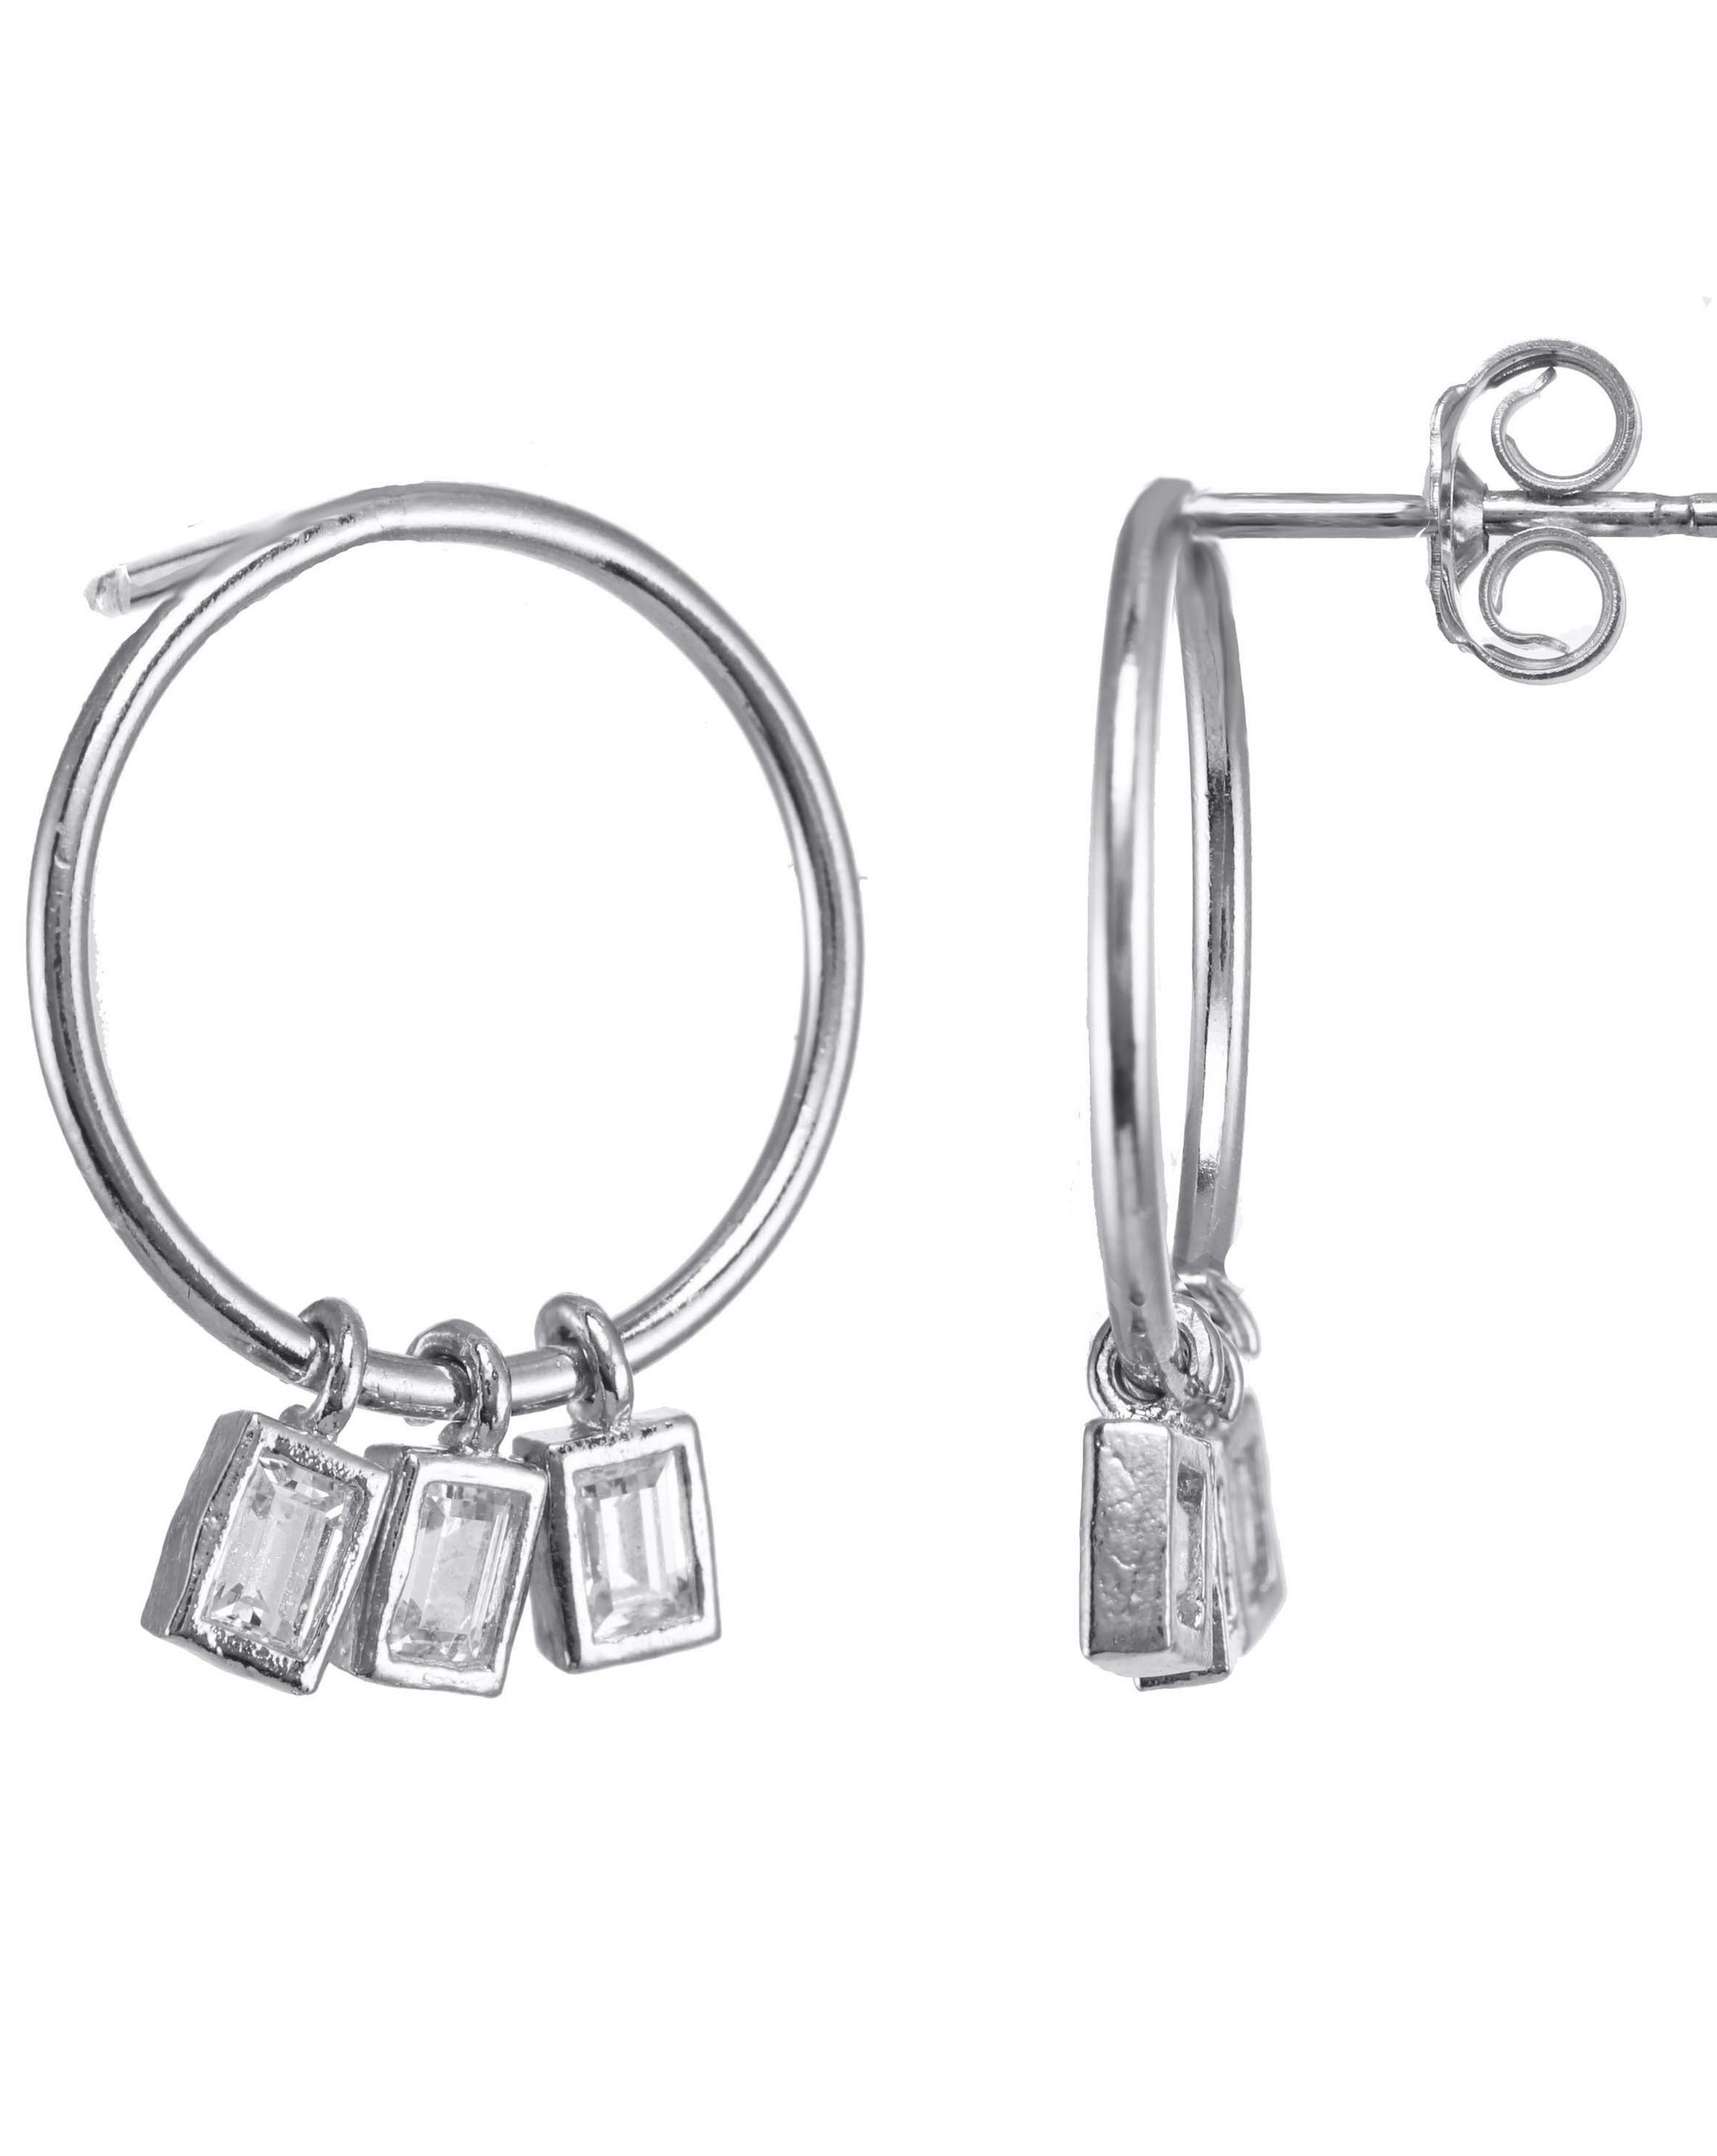 Madison Earrings by KOZAKH. Short dangling style stud earrings crafted in Sterling Silver, featuring a hoop and square cut Cubic Zirconia gems.